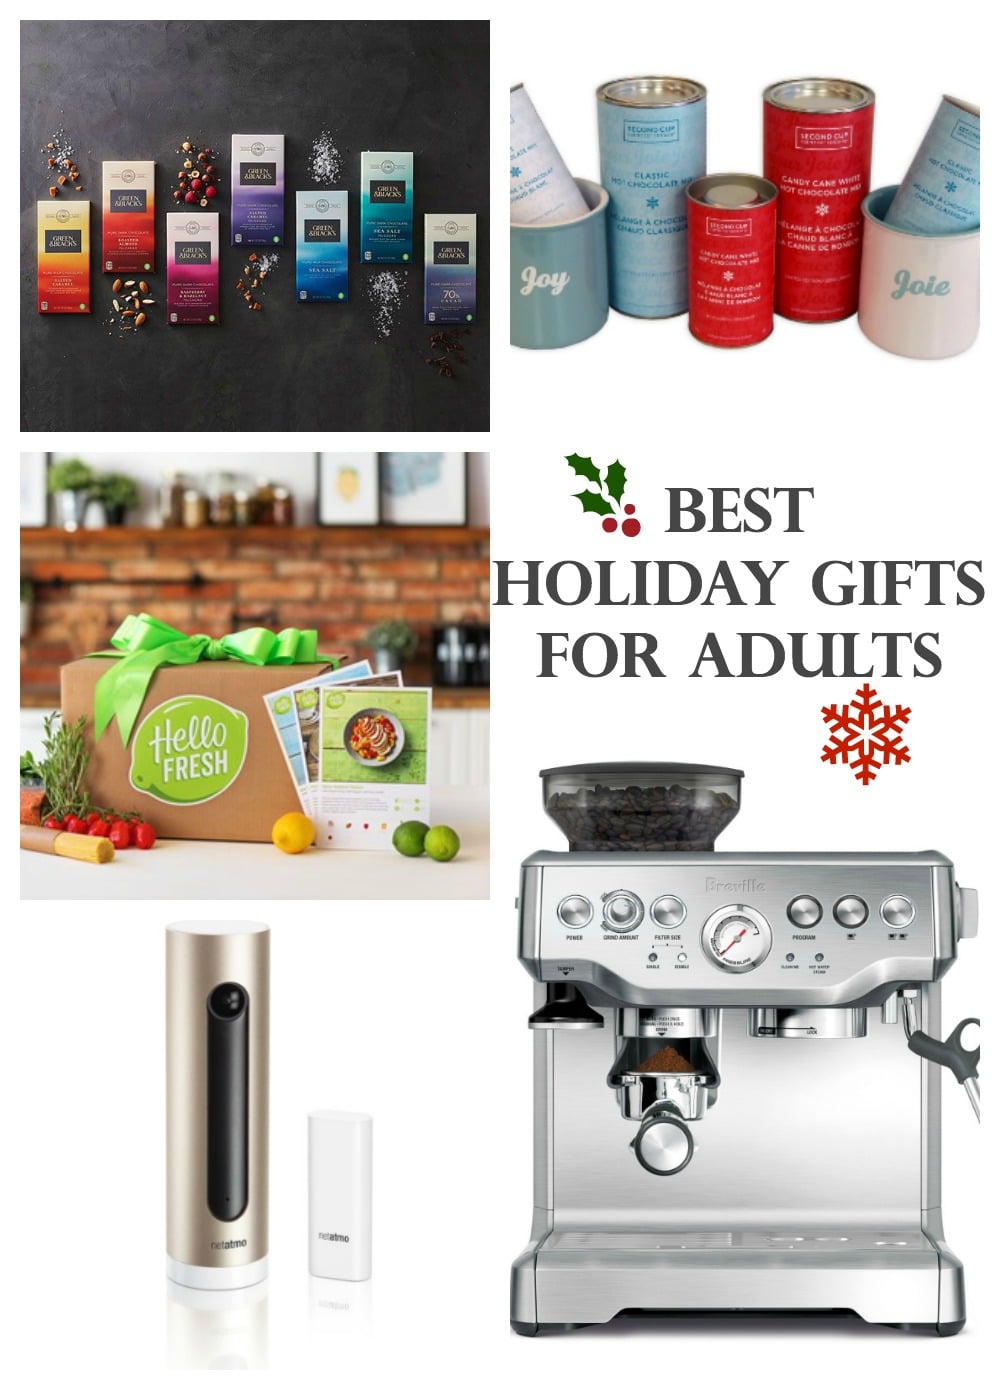 Best Holiday Gifts for Adults